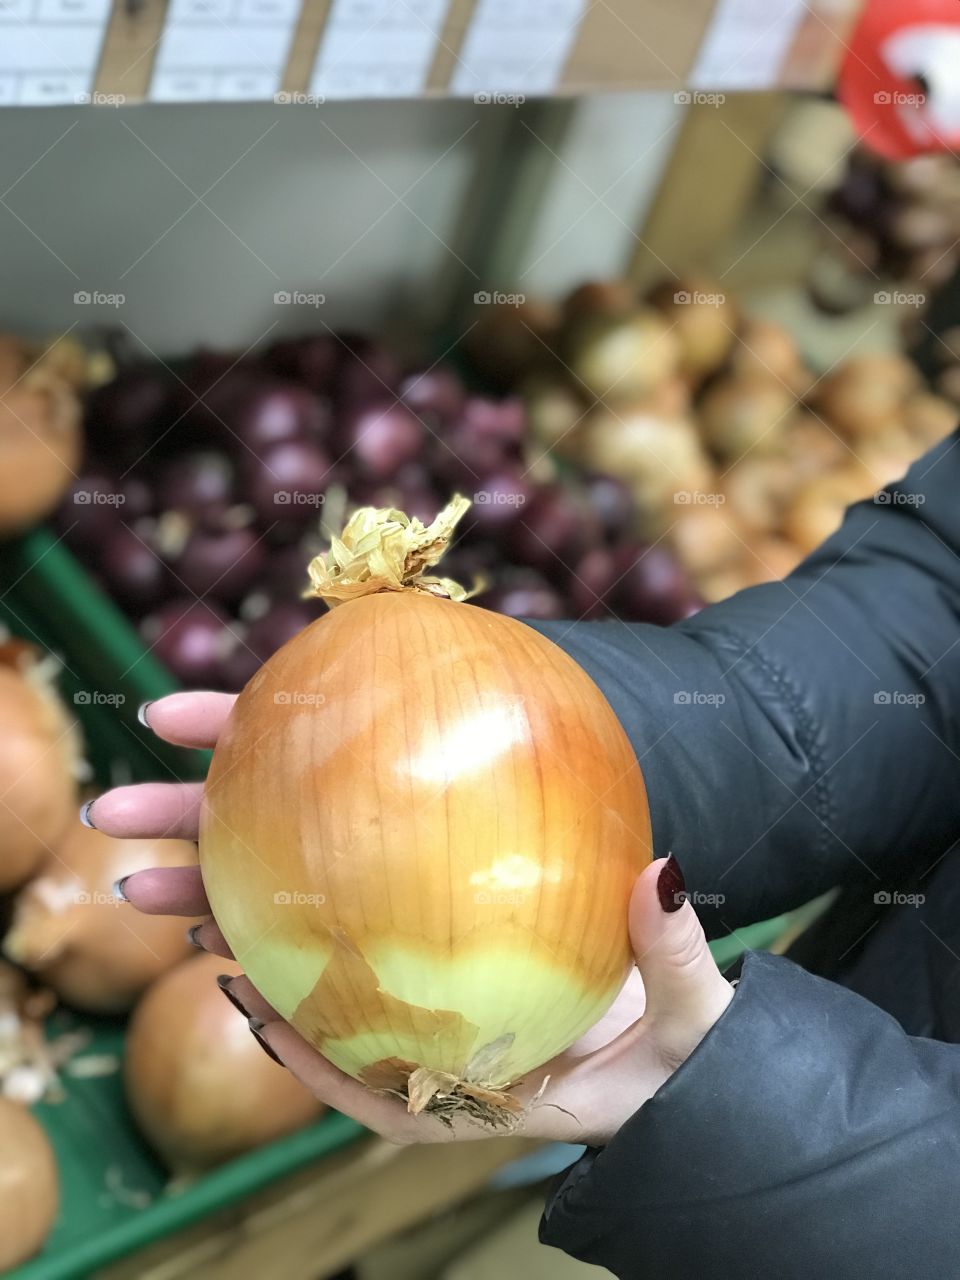 Picture of a large onion